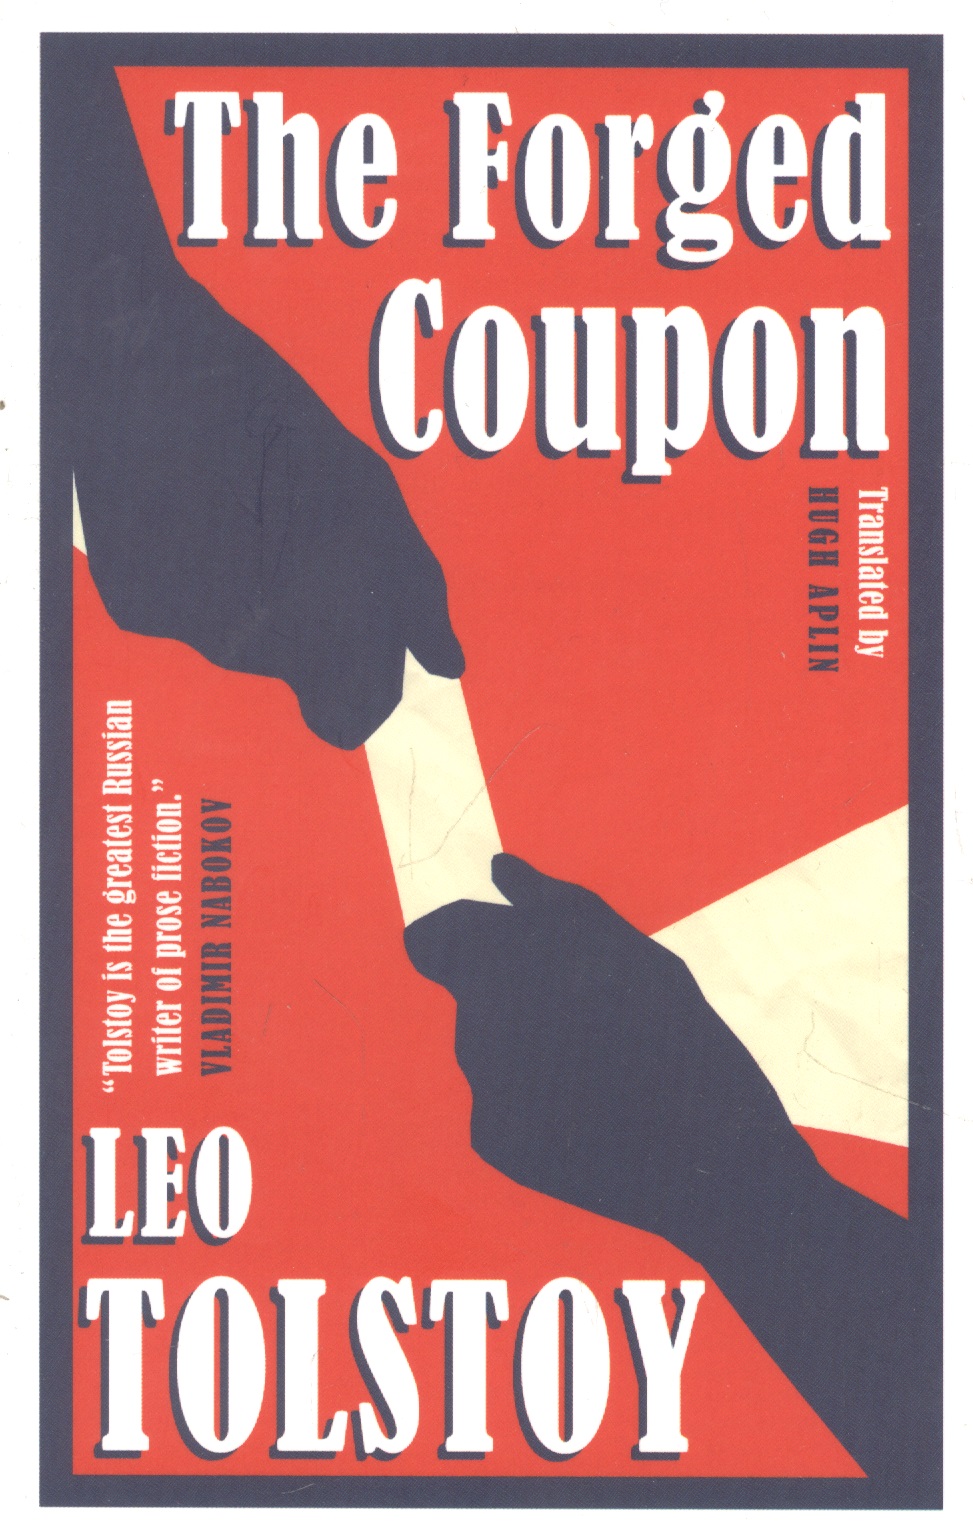 Forged Coupon forged coupon